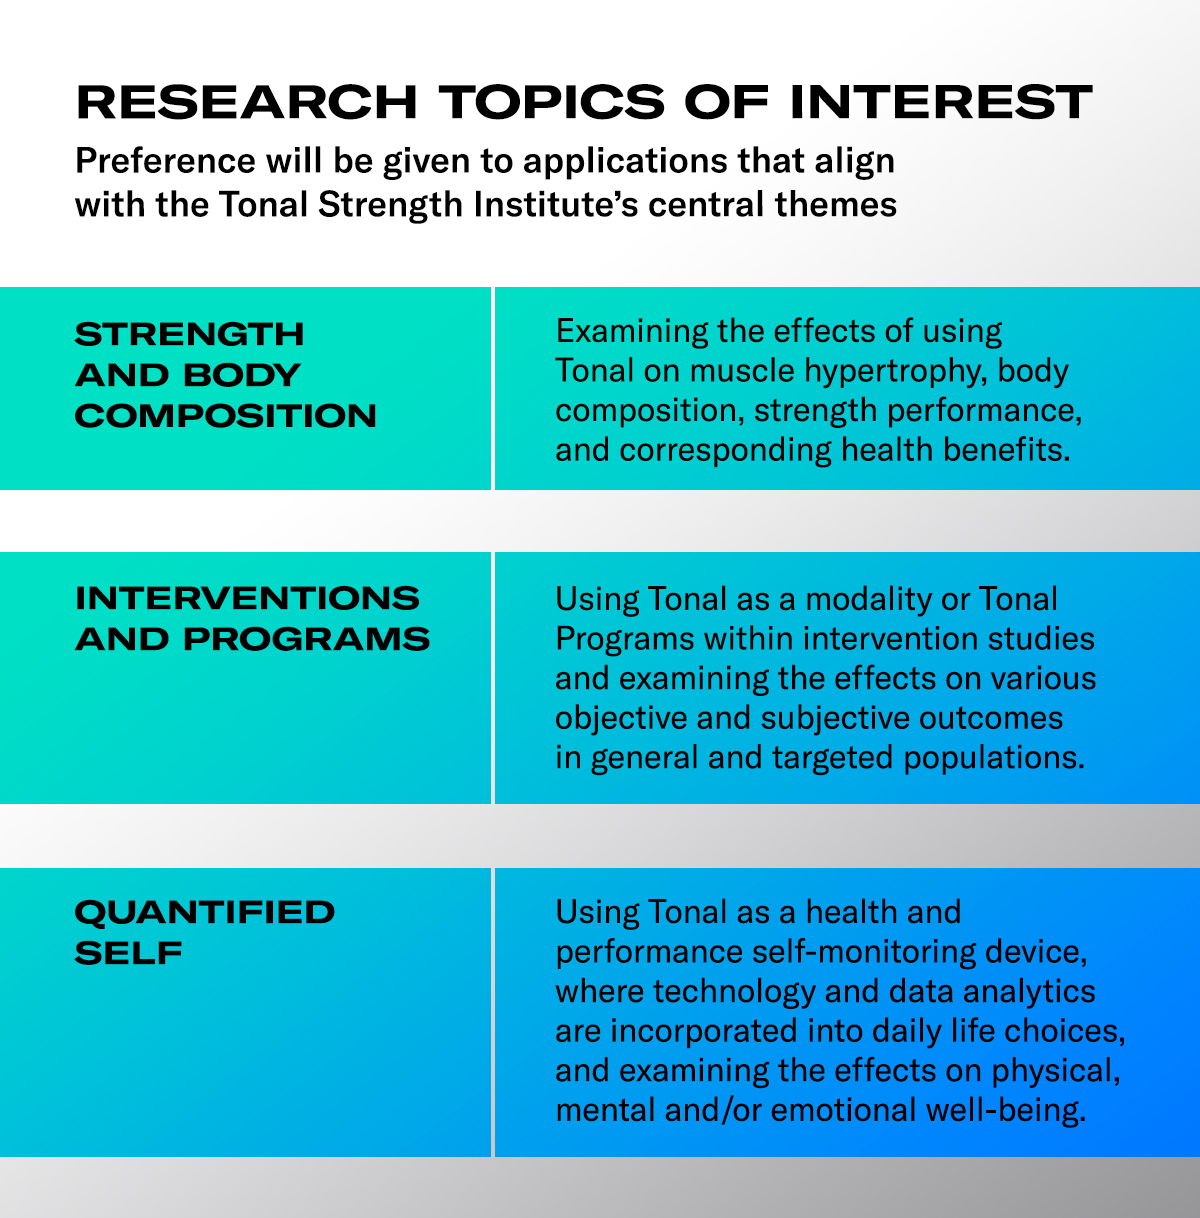 Research Topics of Interests: Preference will be given to applications that align with Tonal Strength Institute's central themes Strength and Body Composition: Examining the effects of using Tonal on muscle hypertrophy, body composition, strength performance, and corresponding health benefits.
Interventions and Programs: Using Tonal as a modality or Tonal Programs within intervention studies and examining the effects on various objective and subjective outcomes in general and targeted populations.
Quantified Self: Using Tonal as a health and performance self-monitoring device, where technology and data analytics are incorporated into daily life choices, and examining the effects on physical, mental and/or emotional well-being.
